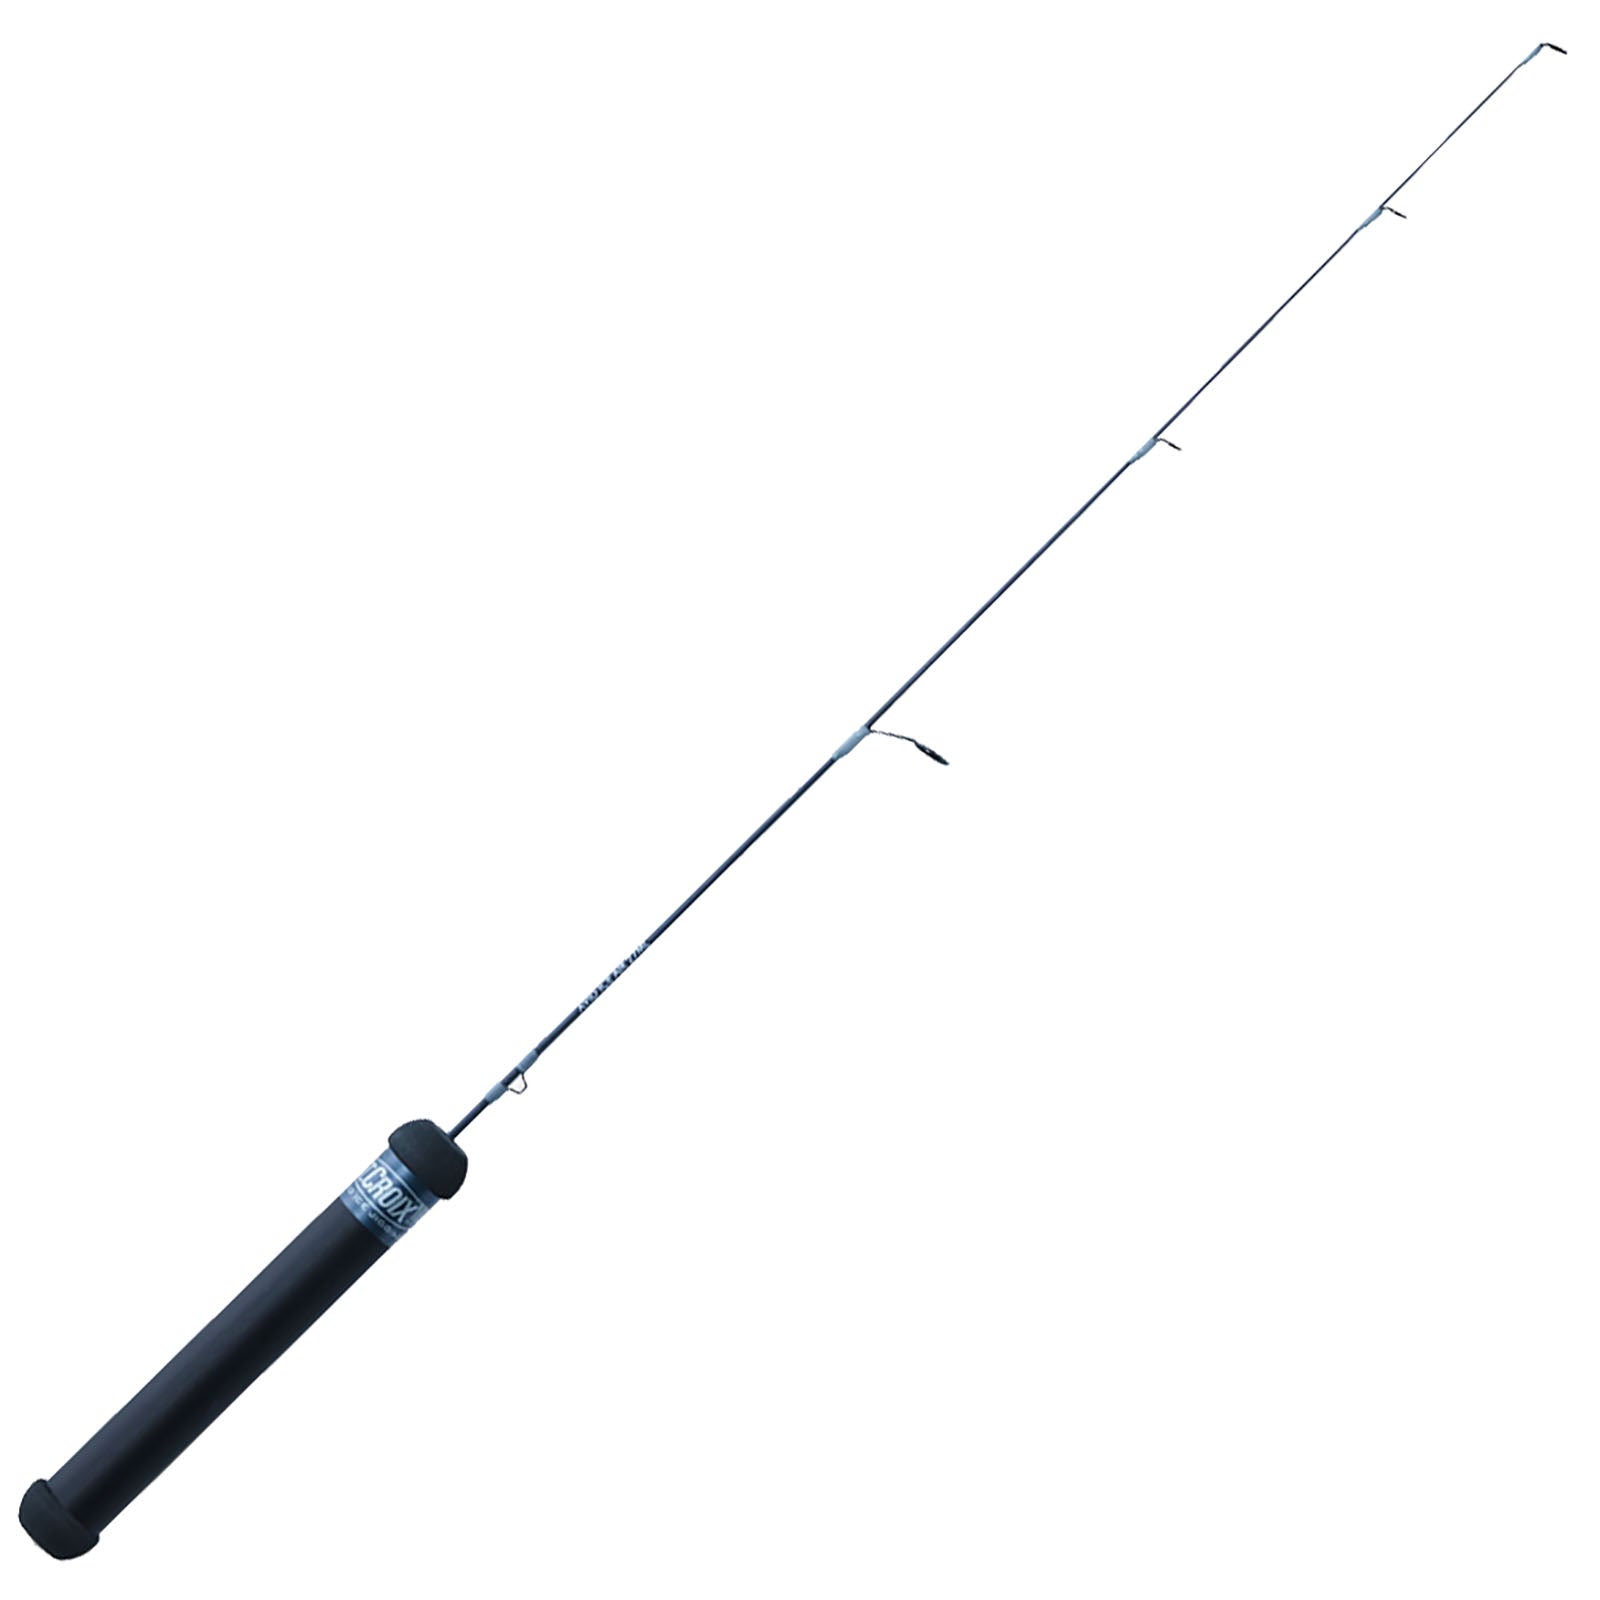 ST. CROIX AVID ICE JIGGING ROD AIR36MH - Lakeside Bait & Tackle